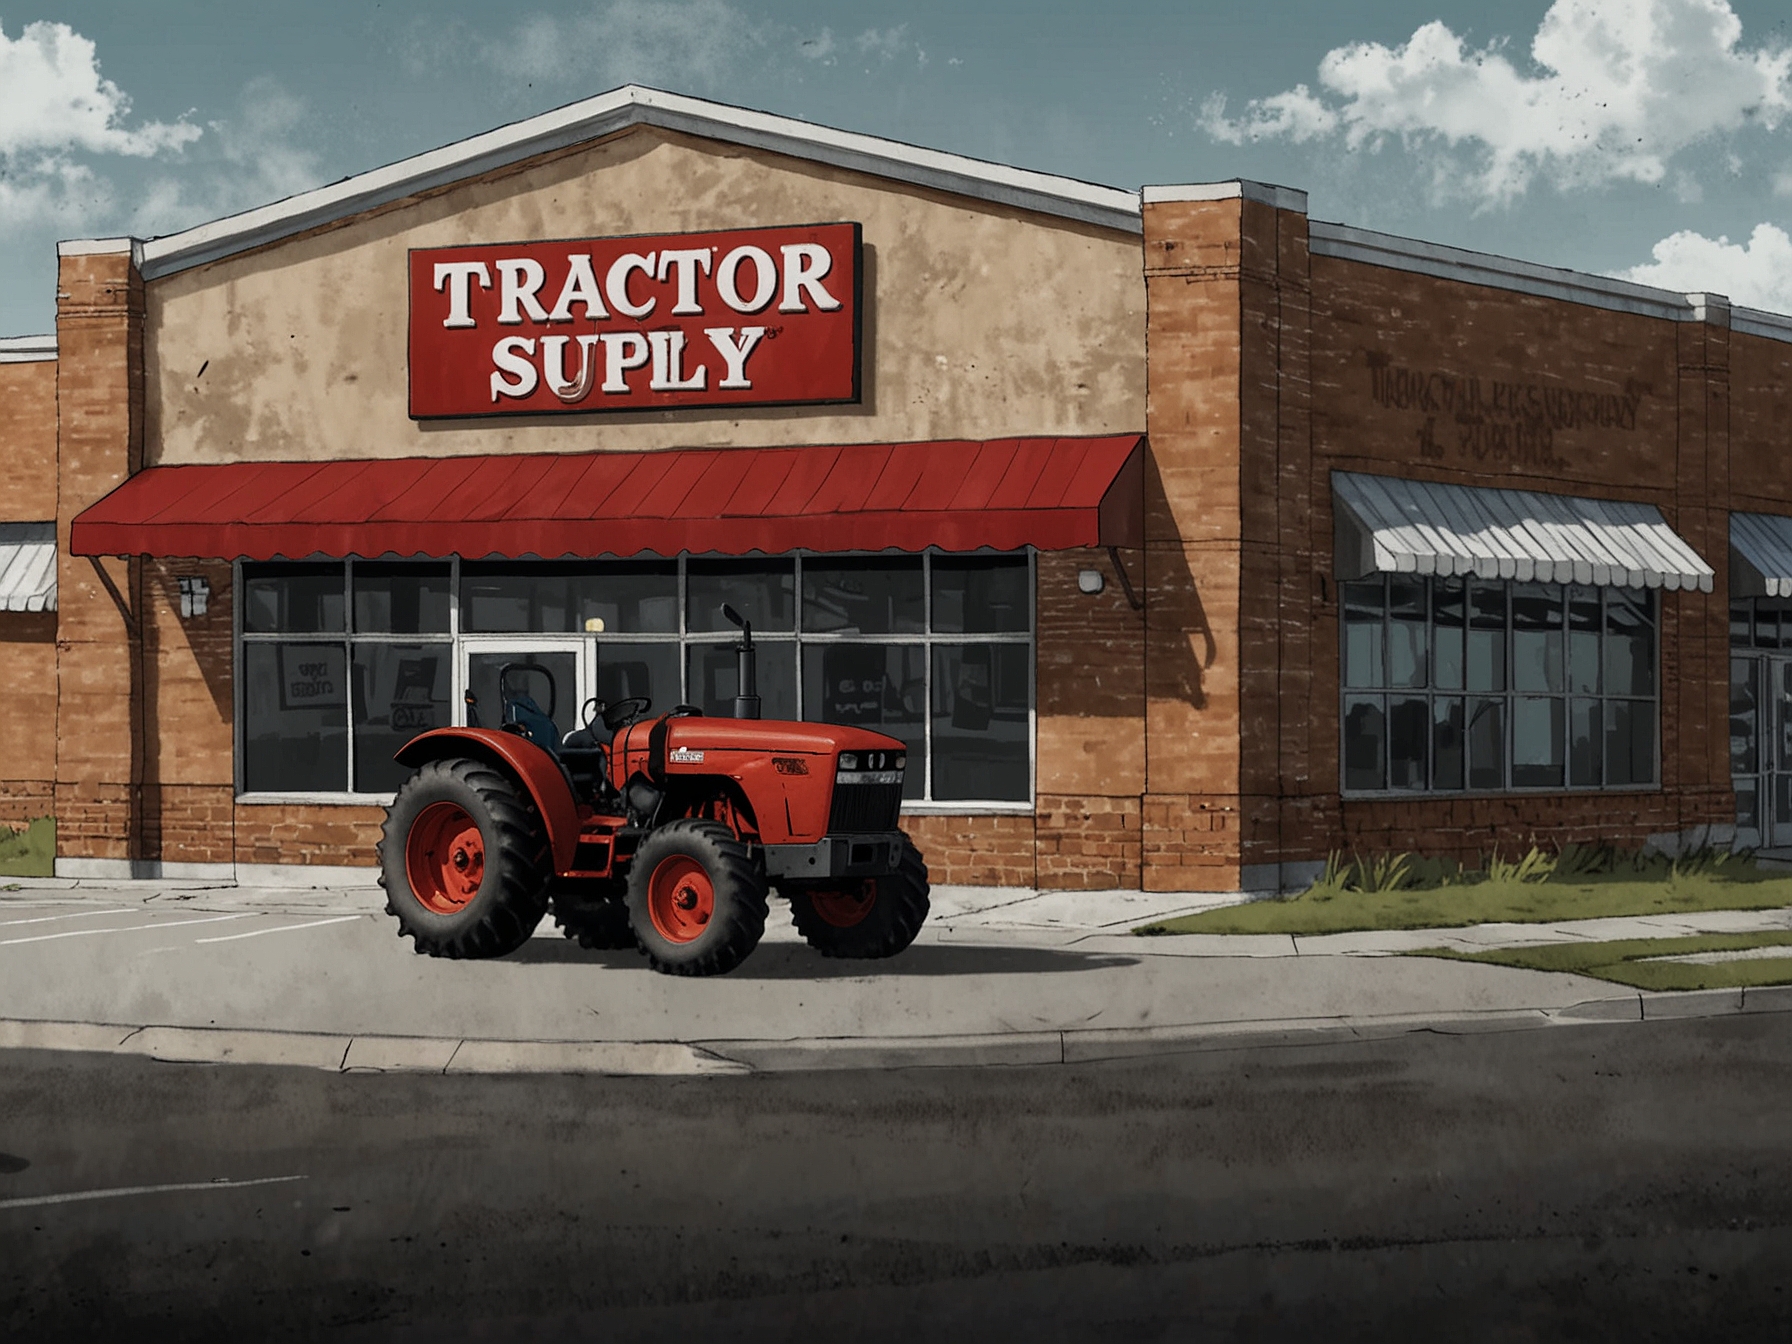 Tractor Supply store exterior with a sign in the foreground showing support for diversity, equity, and inclusion, symbolizing the clash over the company's reduction in DEI policies.